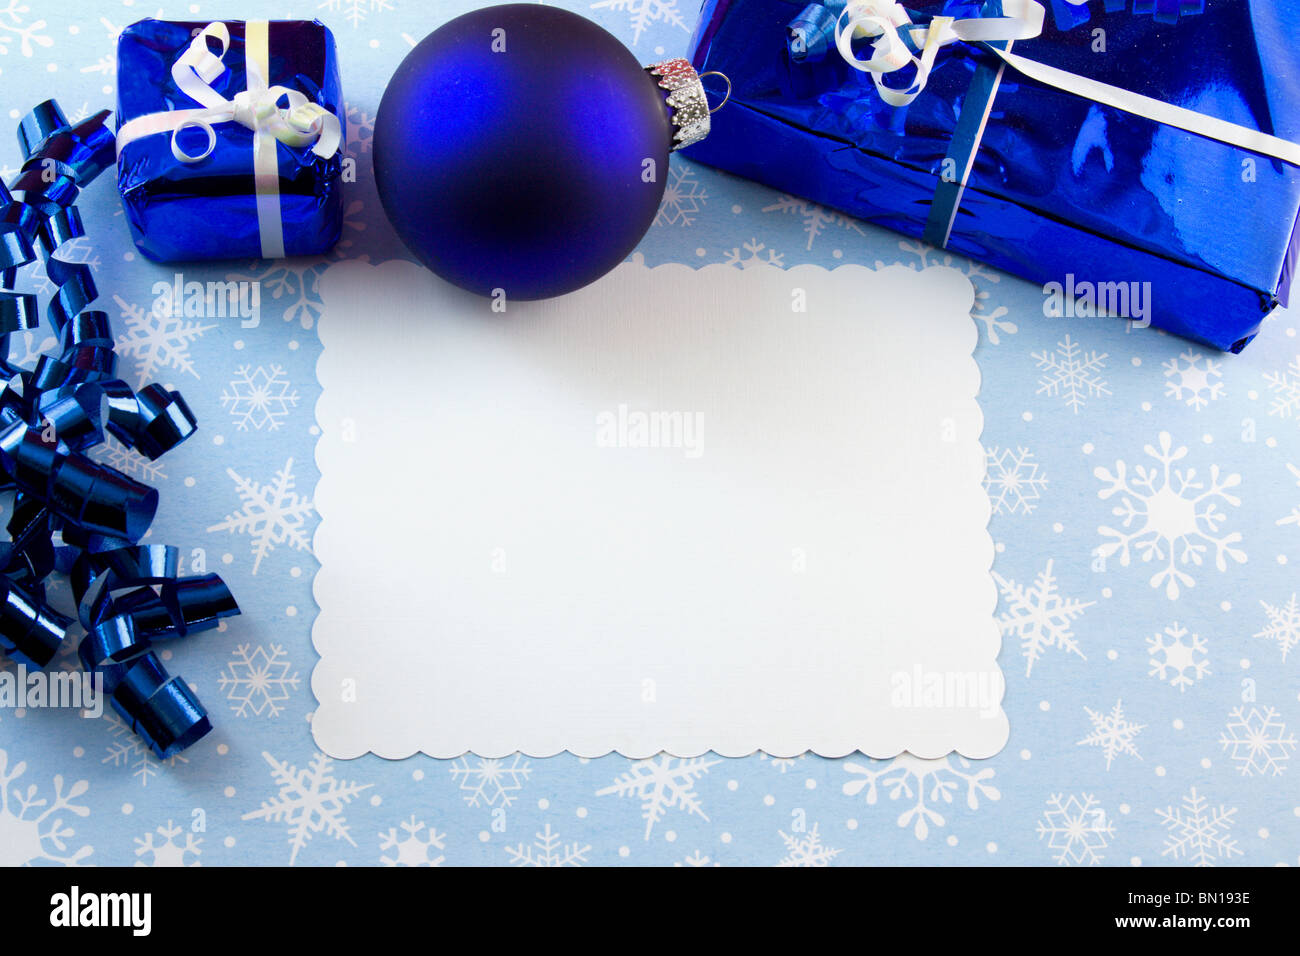 blank Christmas card with blue bauble, presents, curly ribbon on a snowflake background with copyspace Stock Photo